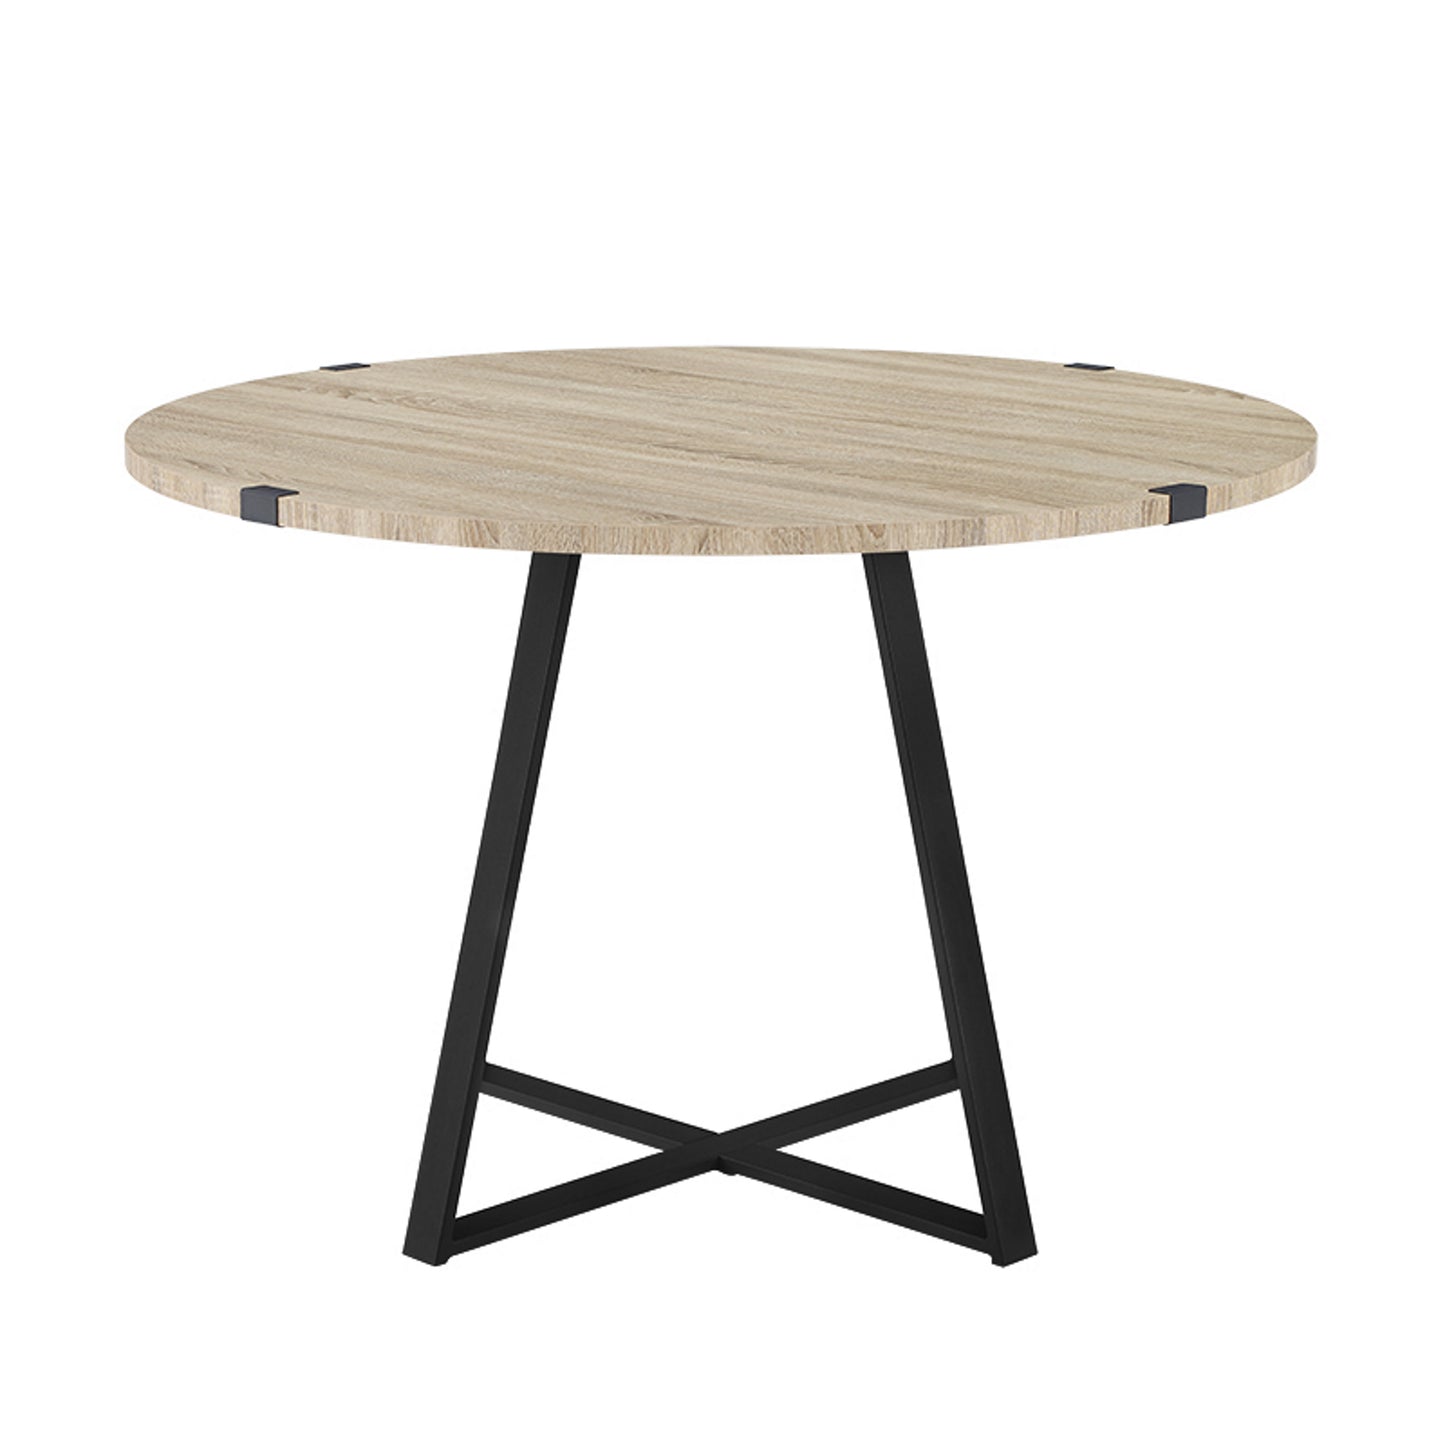 Criterion Capri Dining Table 1150mm Round Table, Black Metal Leg and Metal Highlights Oak